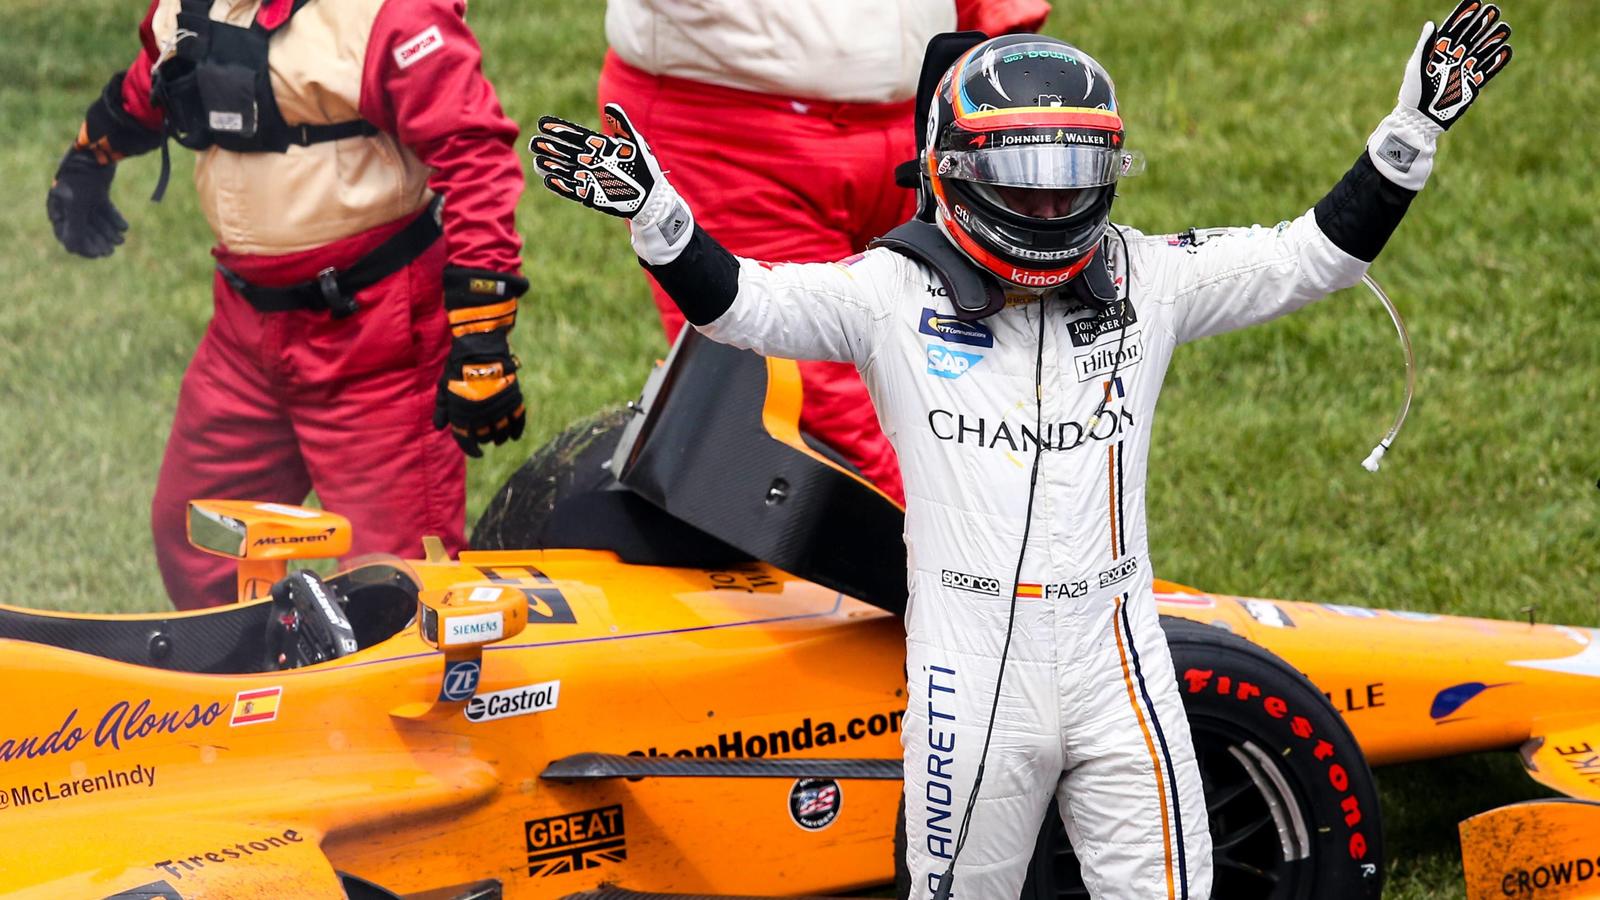 Fernando Alonso acknowledges the turn one crowd after his engine failed in the 2017 Indianapolis 500, at the Indianapolis Motor Speedway on May 28, 2017 in Indianapolis, Indiana. PUBLICATIONxINxGERxSUIxAUTxHUNxONLY IND2017052833 MIKExGENTRYFernando A